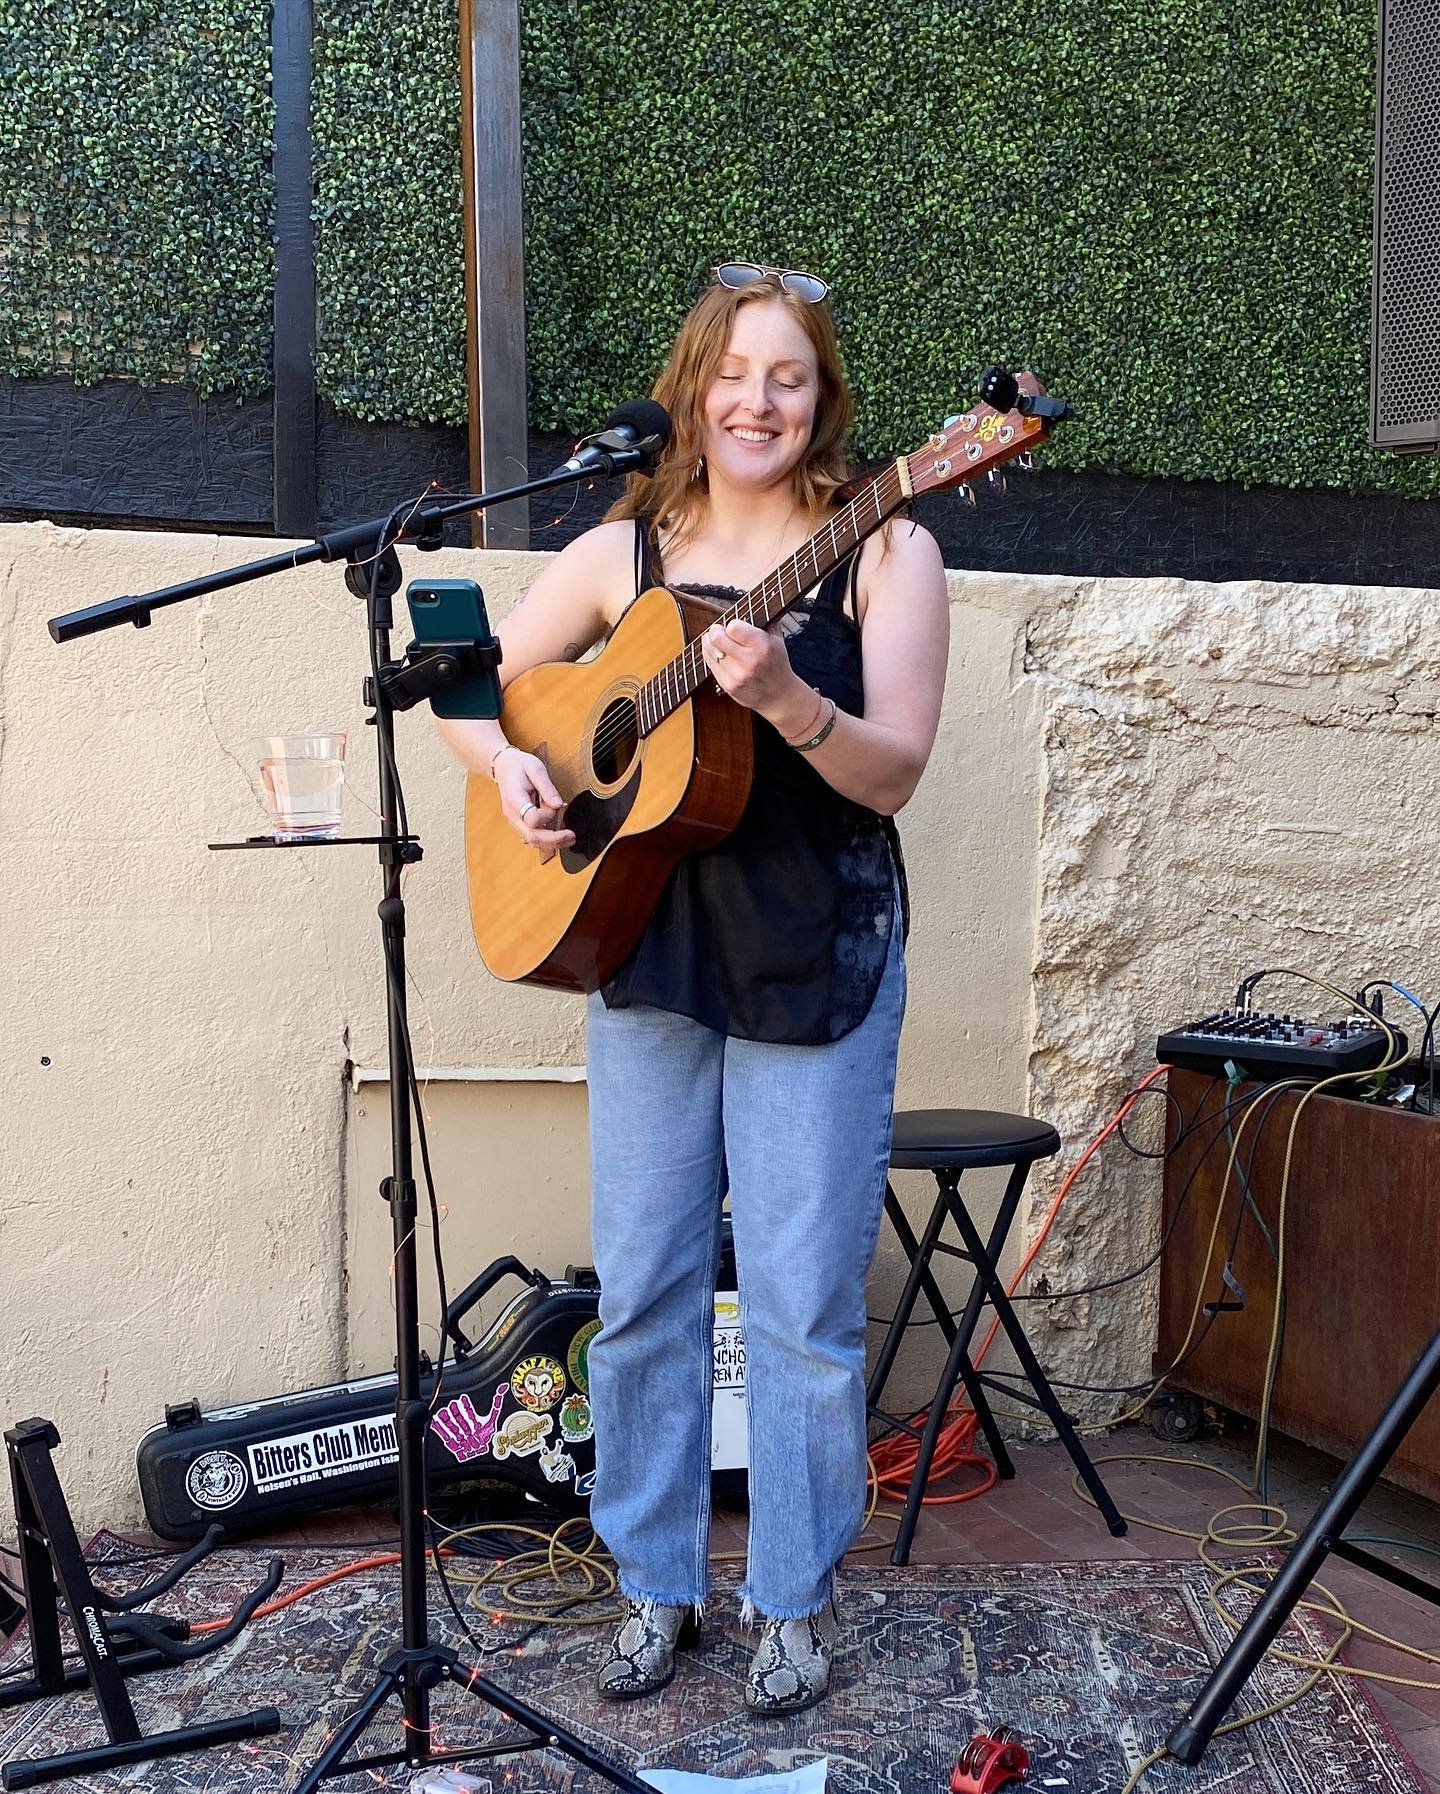 I had such an excellent time playing at @bruzofffax this past weekend! What an honor to kick off their summer music program 😌🍻 And the weather was just perfect! Until next time! 

#celesterosemusic #bruzofffax #bruzbeers #denvermusic #denvermusicar